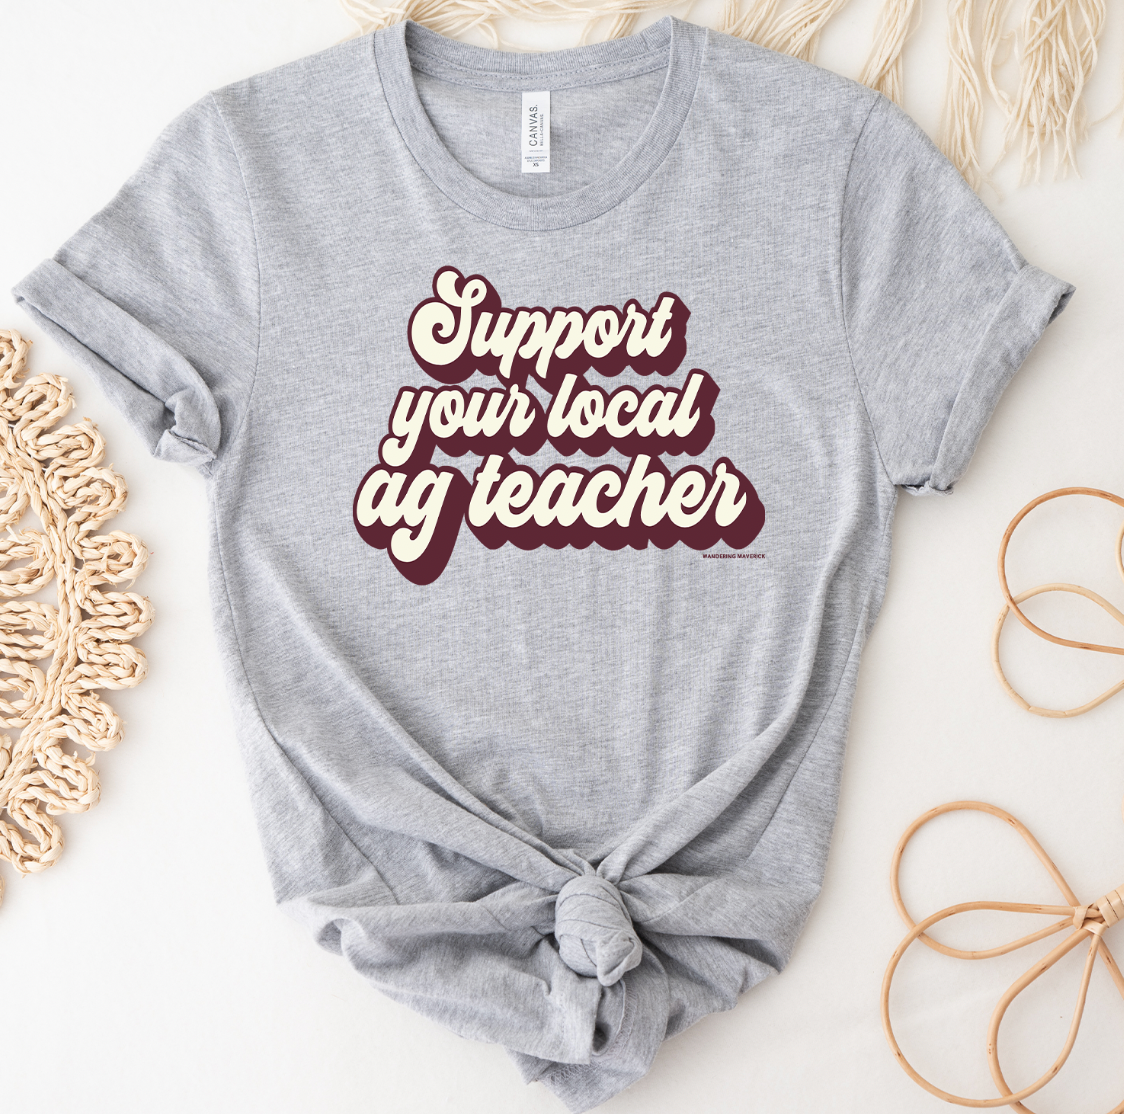 Retro Support Your Local AG Teacher Maroon Ink T-Shirt (XS-4XL) - Multiple Colors!